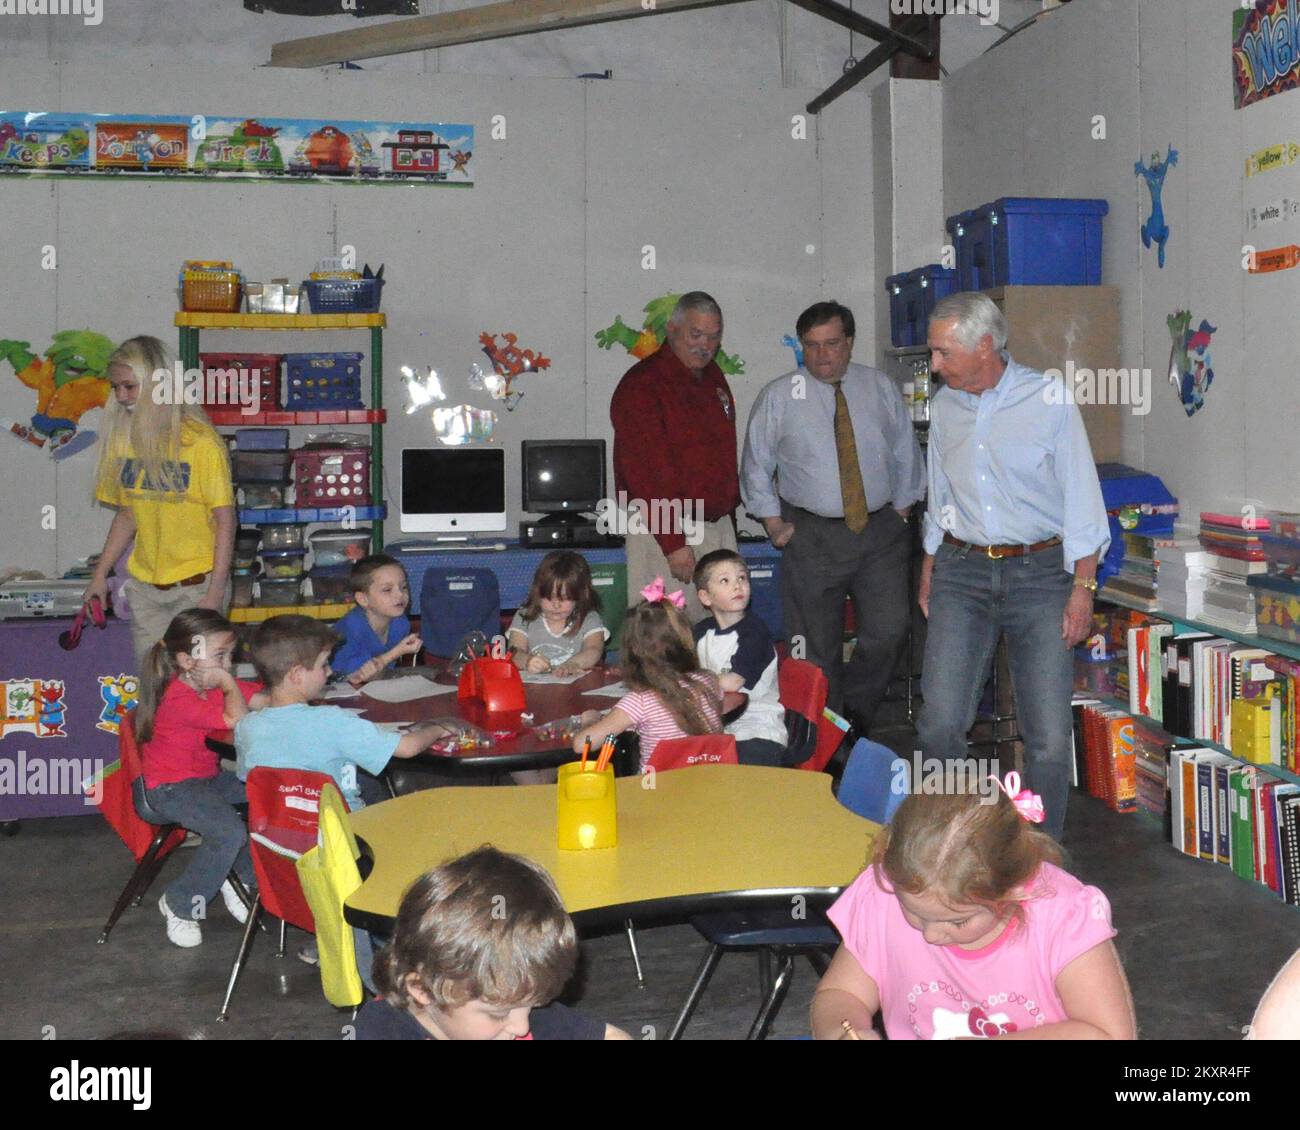 Governor Steve Beshear arrives in West Liberty. Kentucky Severe Storms, Tornadoes, Straight-line Winds, and Flooding. Photographs Relating to Disasters and Emergency Management Programs, Activities, and Officials Stock Photo